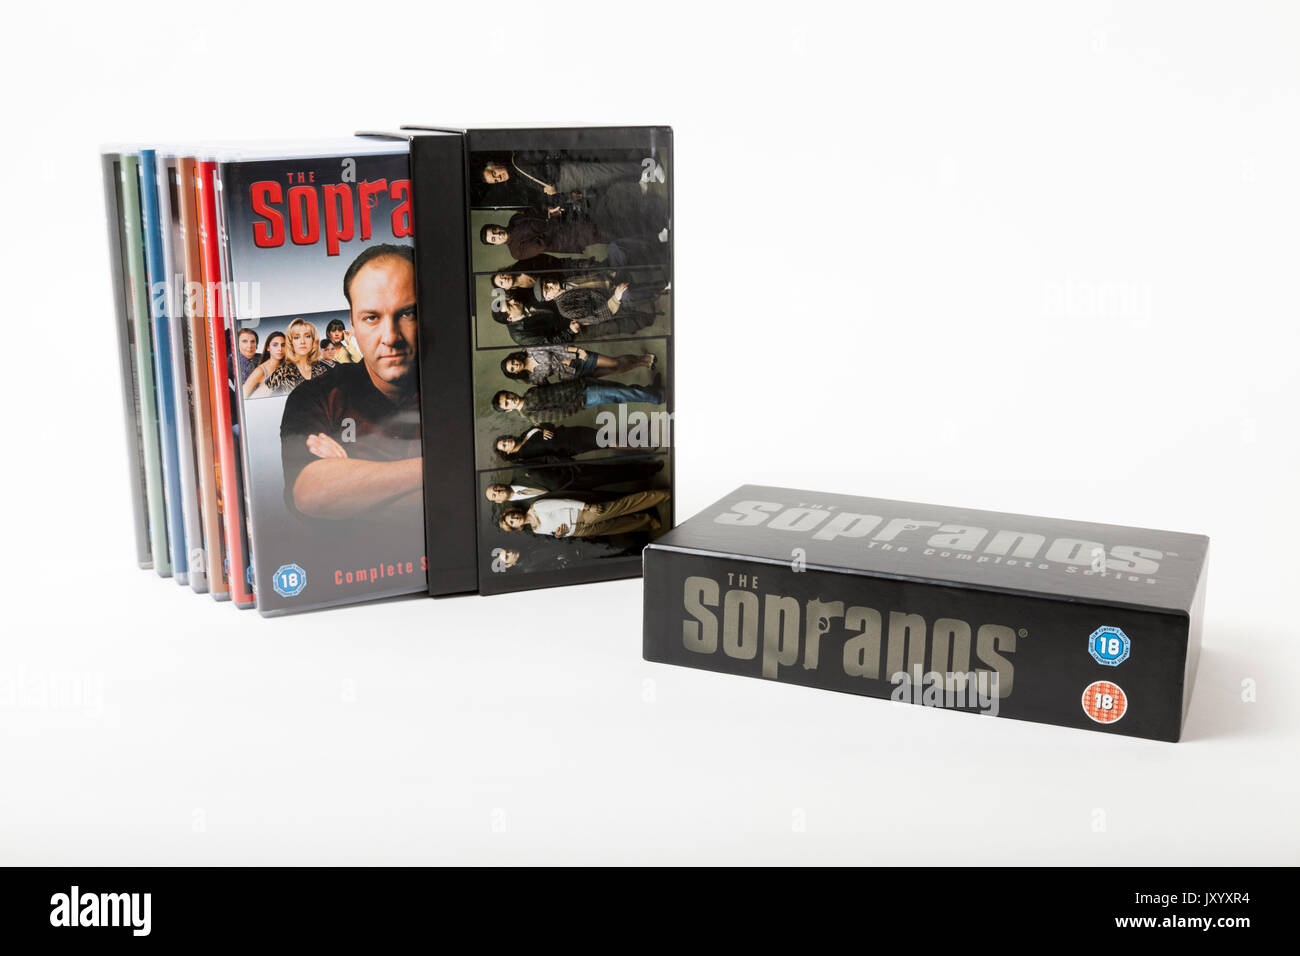 The Sopranos. The Complete Series Collector's Edition DVD box set on a  white background Stock Photo - Alamy